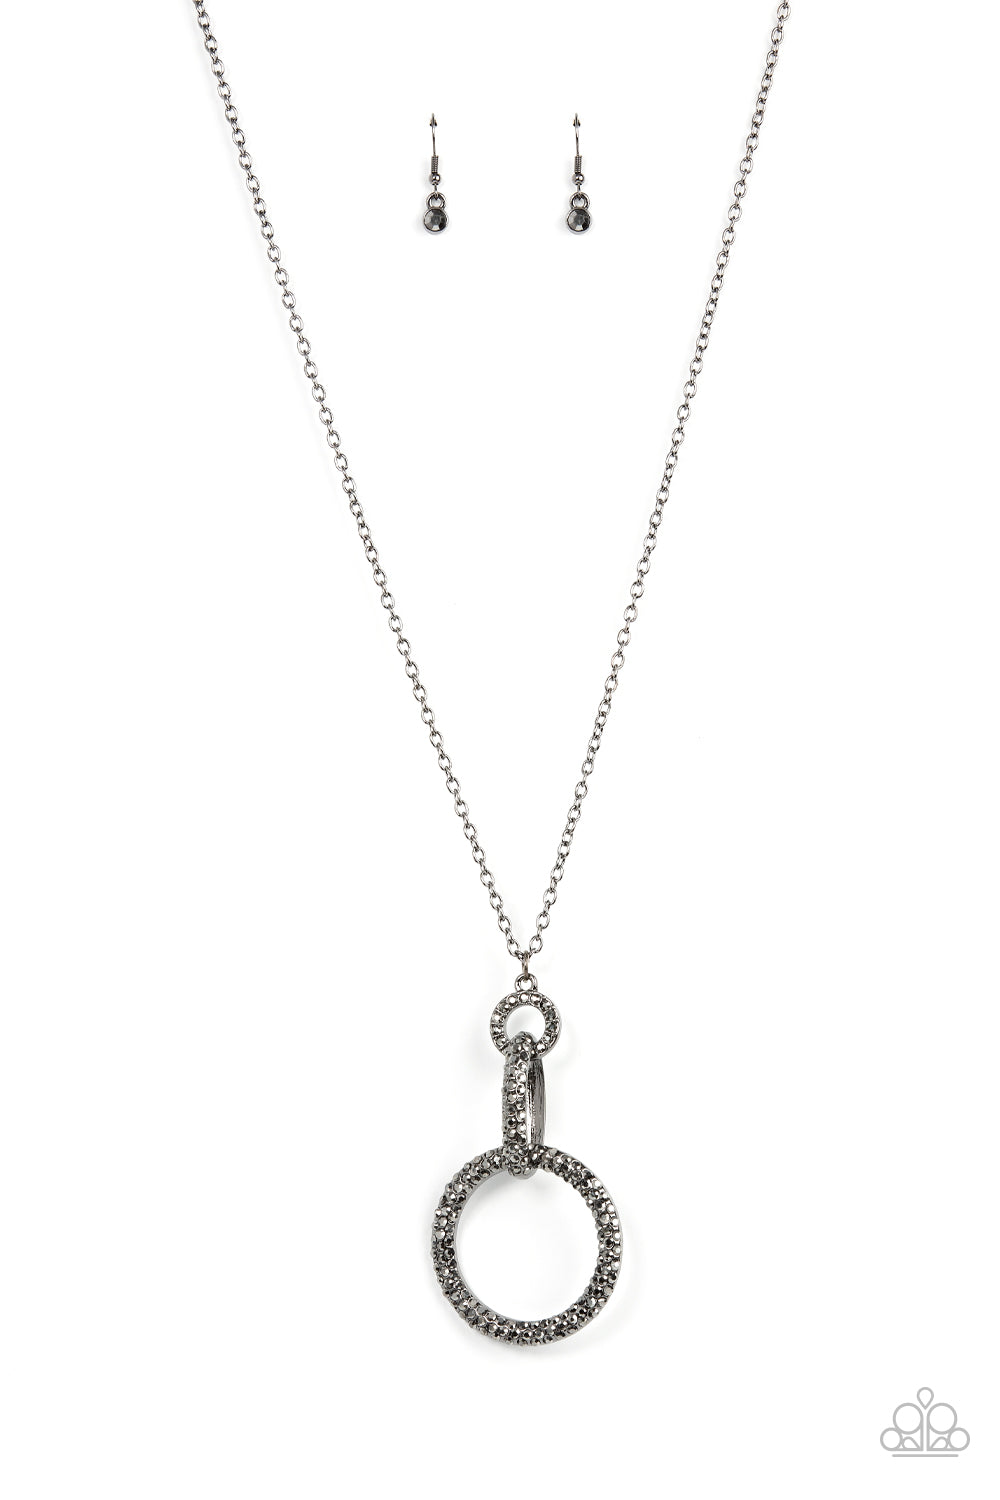 Encrusted with smoky hematite rhinestones, mismatched gunmetal rings, oval fittings, and an oversized hoop delicately link into a smoldering pendant as the bottom of an extended gunmetal chain. Features an adjustable clasp closure